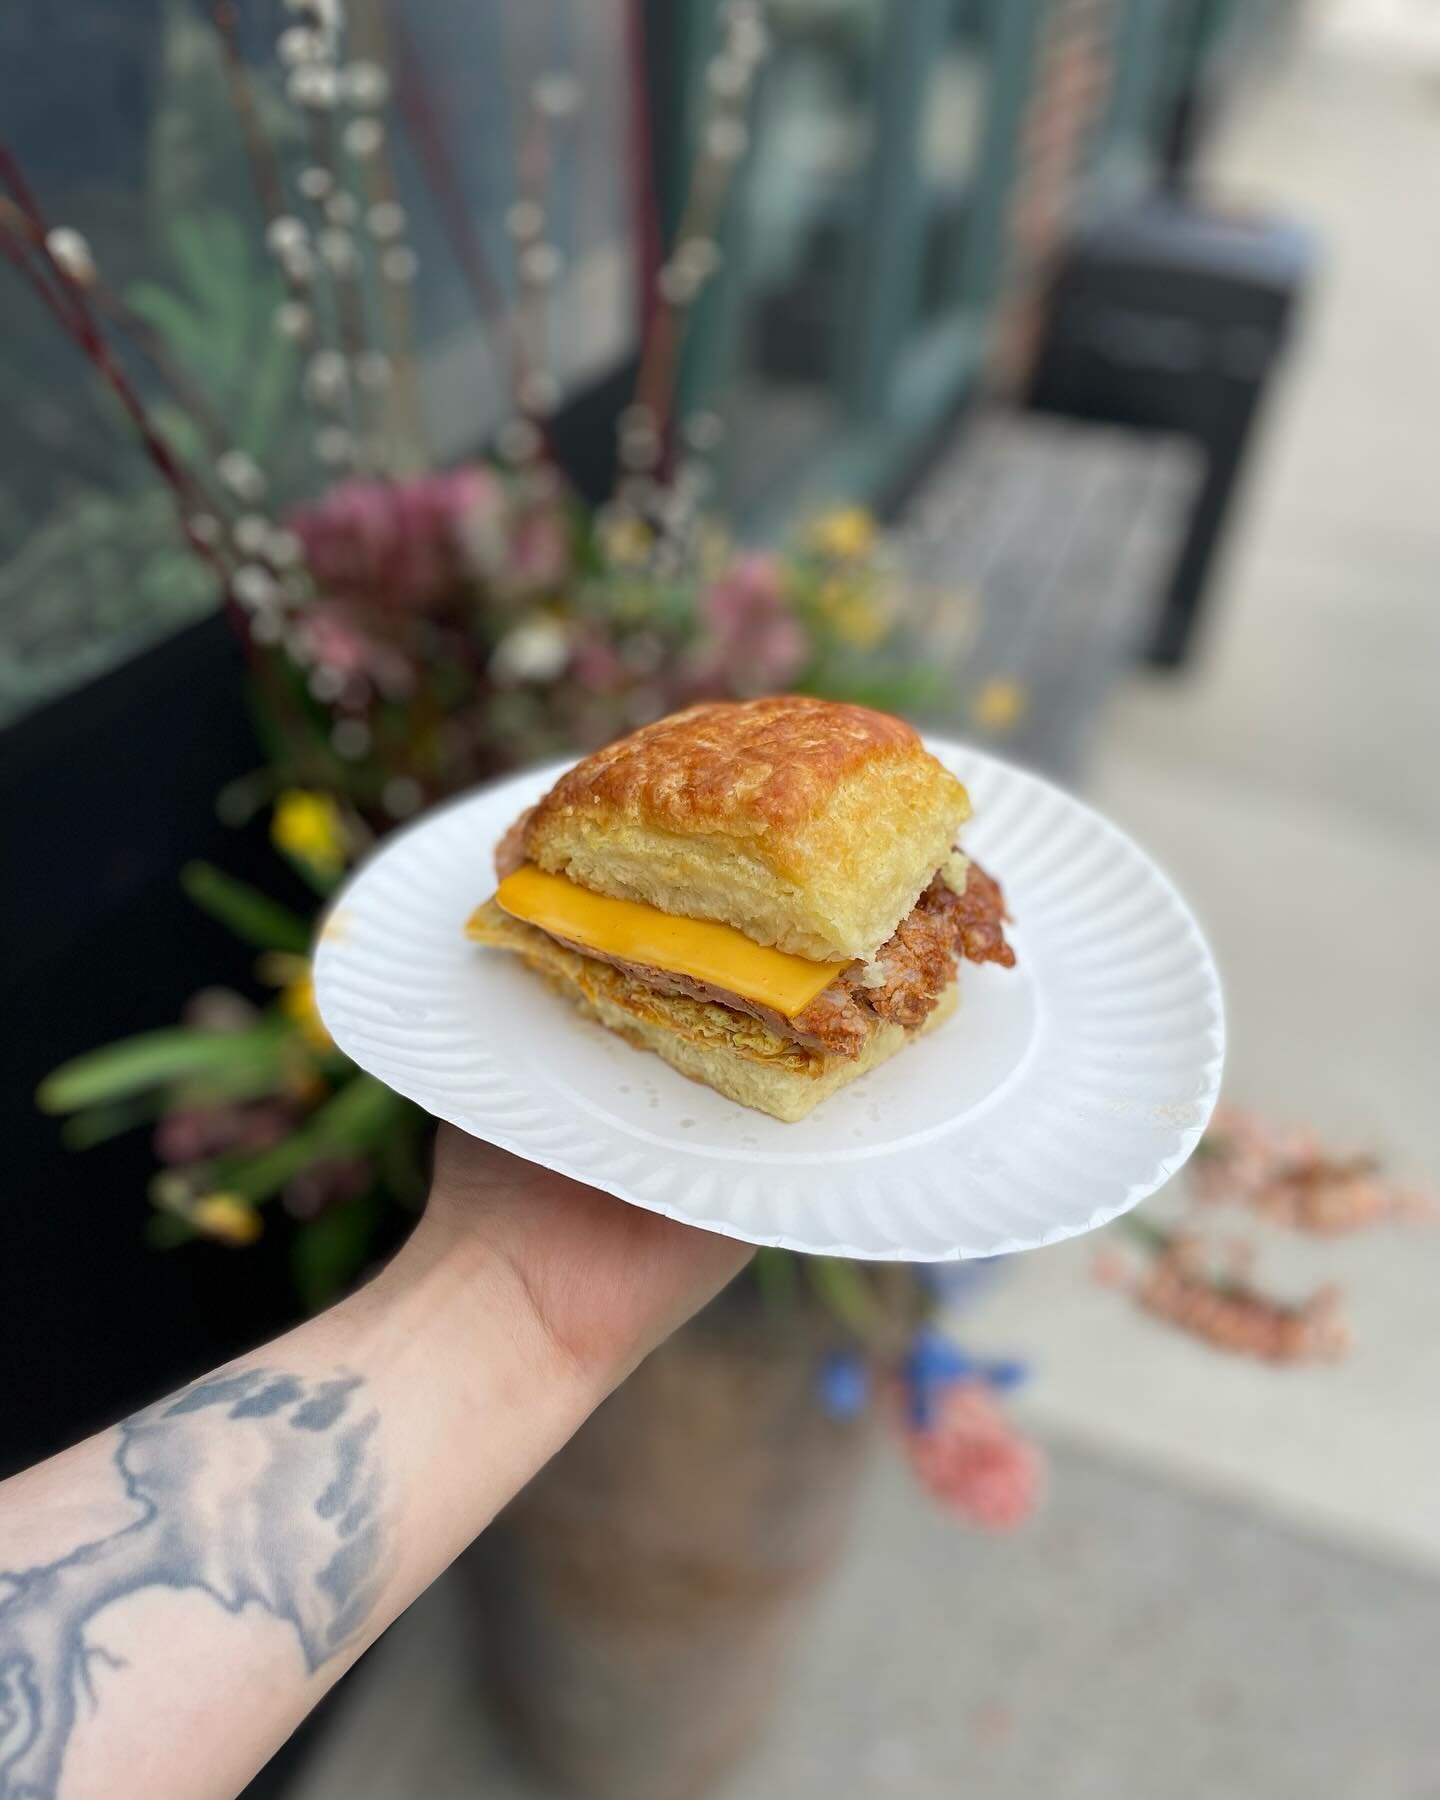 Shake up your Sunday brunch plans with our Hot Sausage Egg + Cheese on our big ole Sin City Biscuits 🍳🐣

Don&rsquo;t forget a Vietnamese Iced Coffee or Thai Iced Tea to go with it 🧋

Enjoy the beautiful day ☀️ stop by and say hi, order online or f